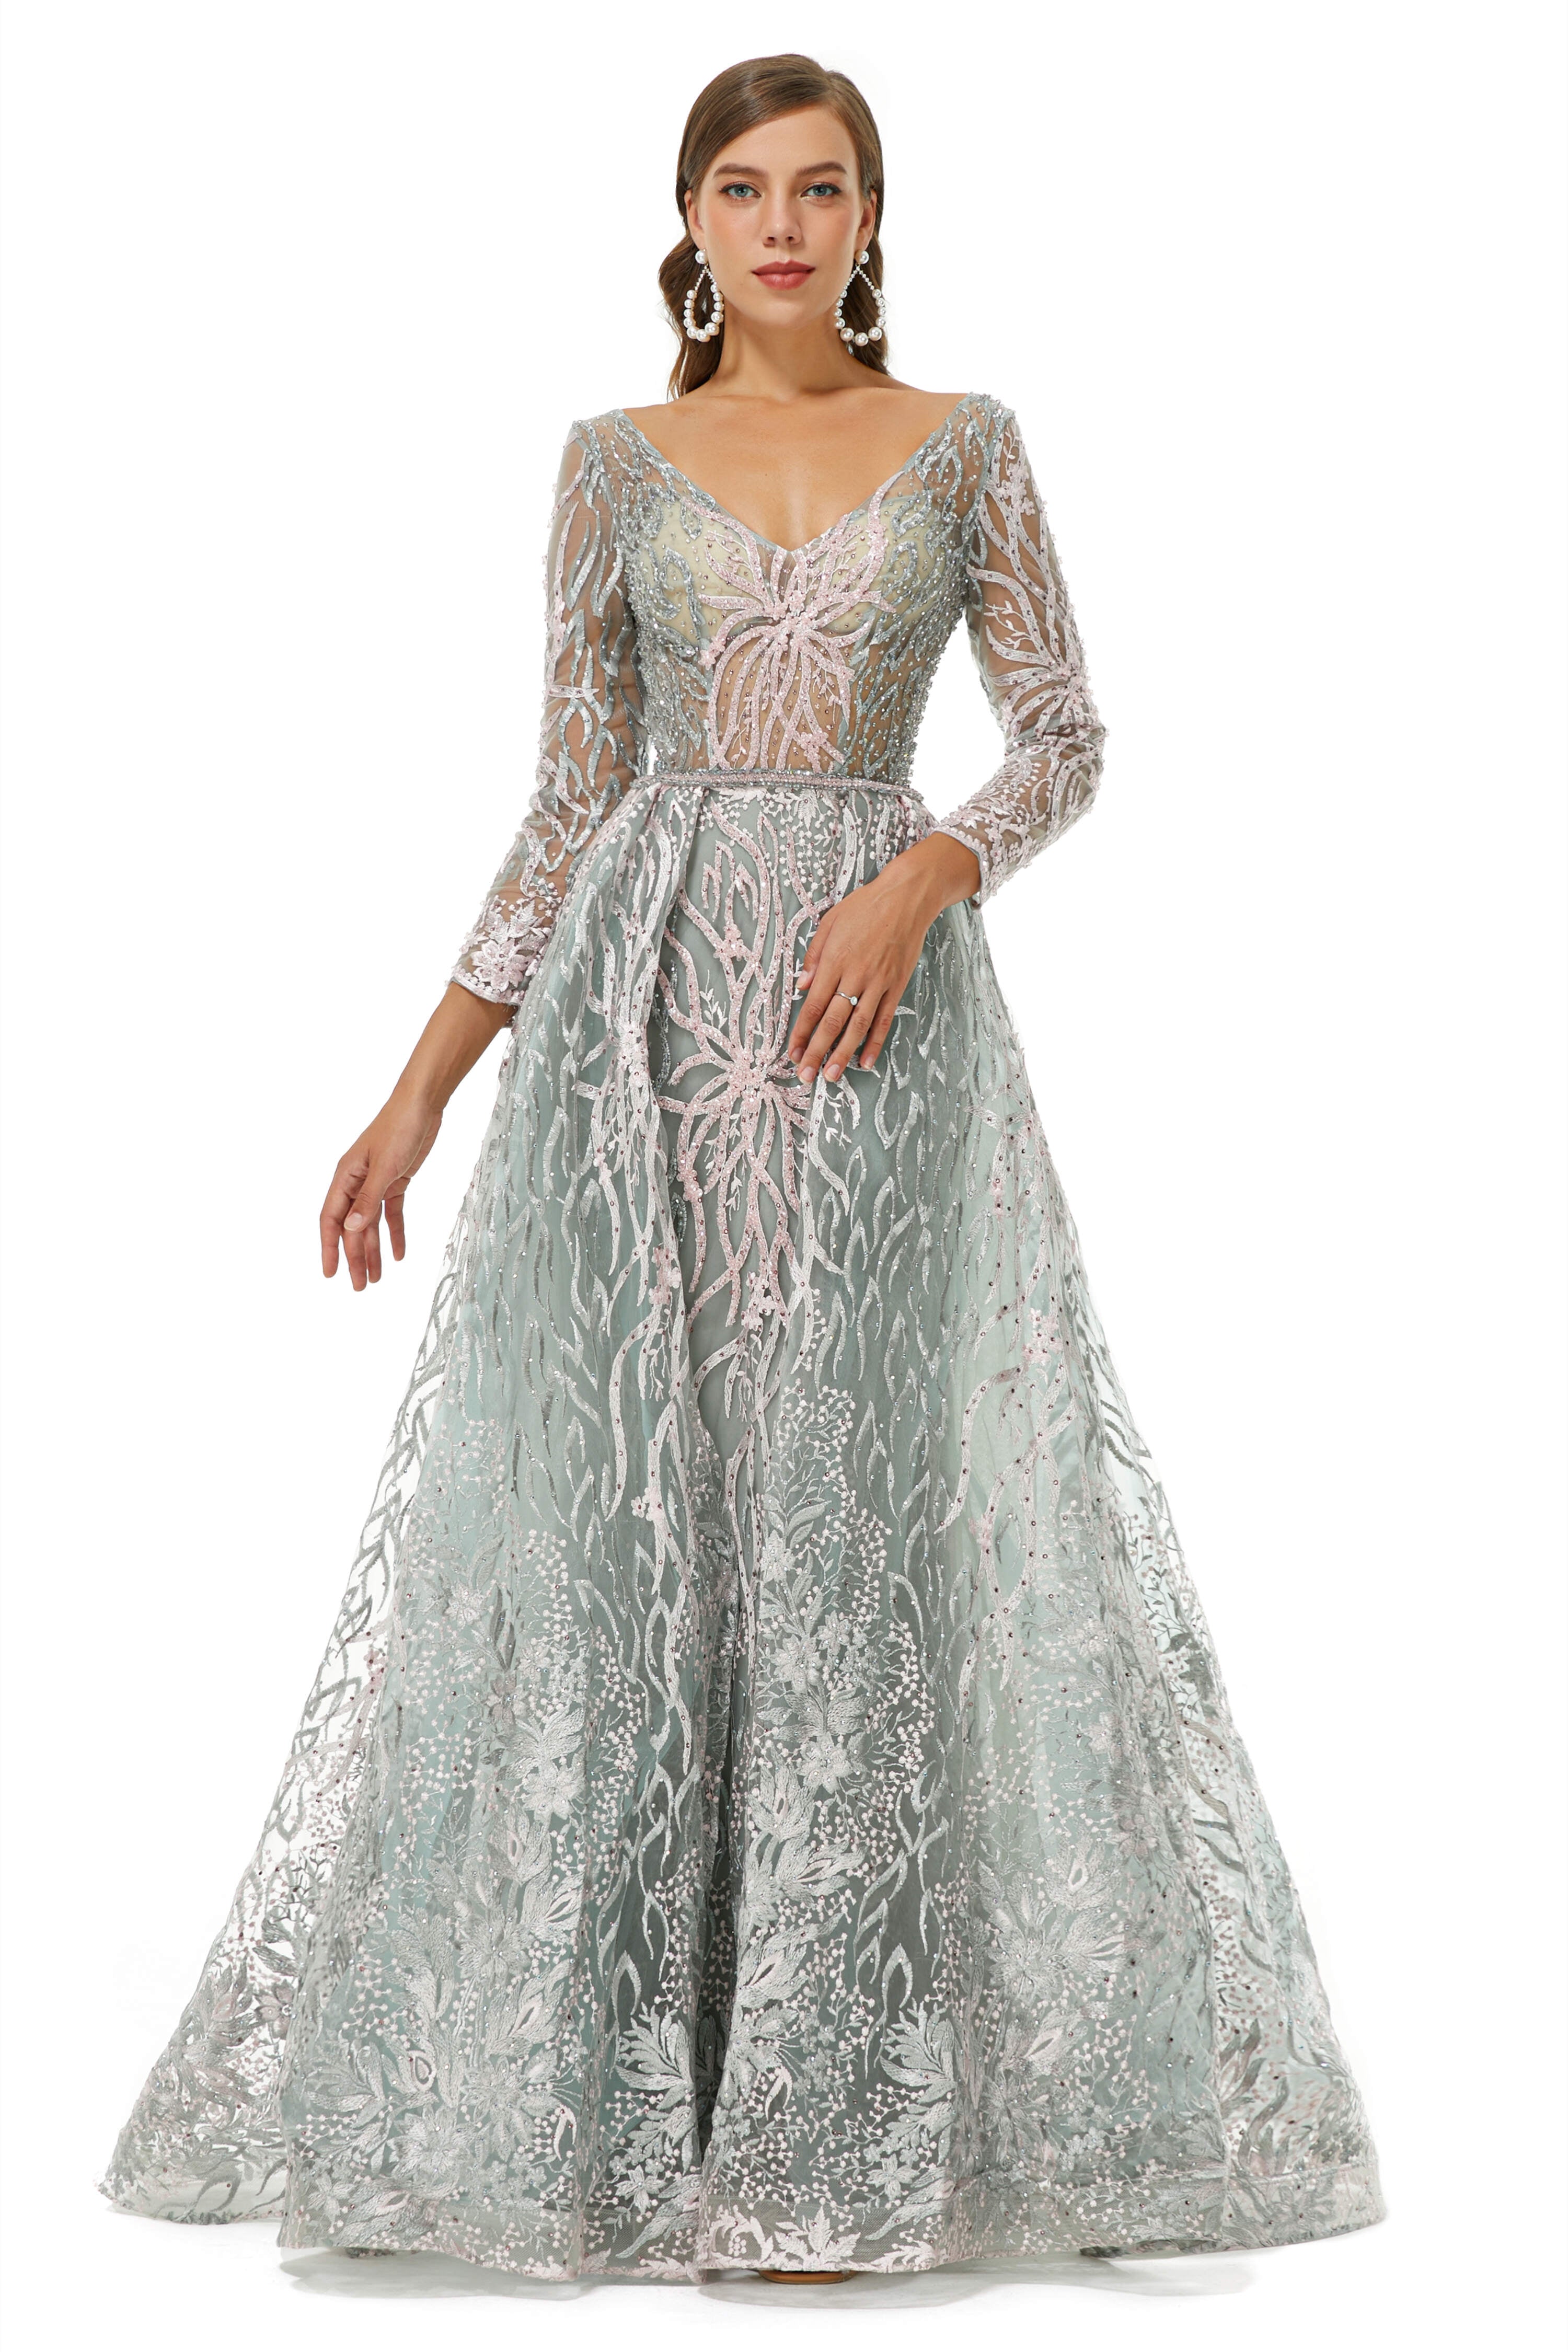 A-line V-neck Floor-length Long Sleeve Open Back Appliques Lace Corset Prom Dresses outfit, Formal Dresses With Sleeves